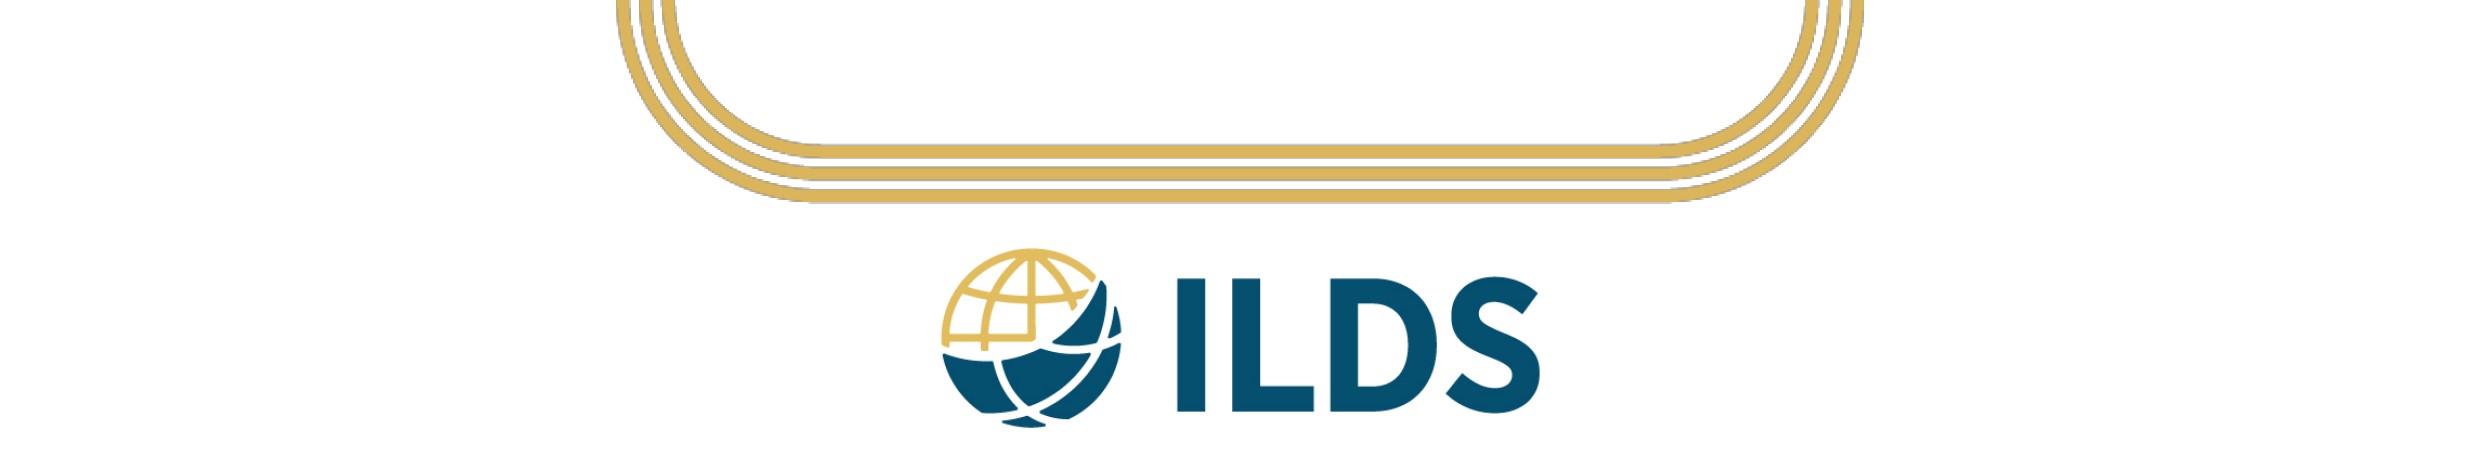 ILDS header with yellow brand lines